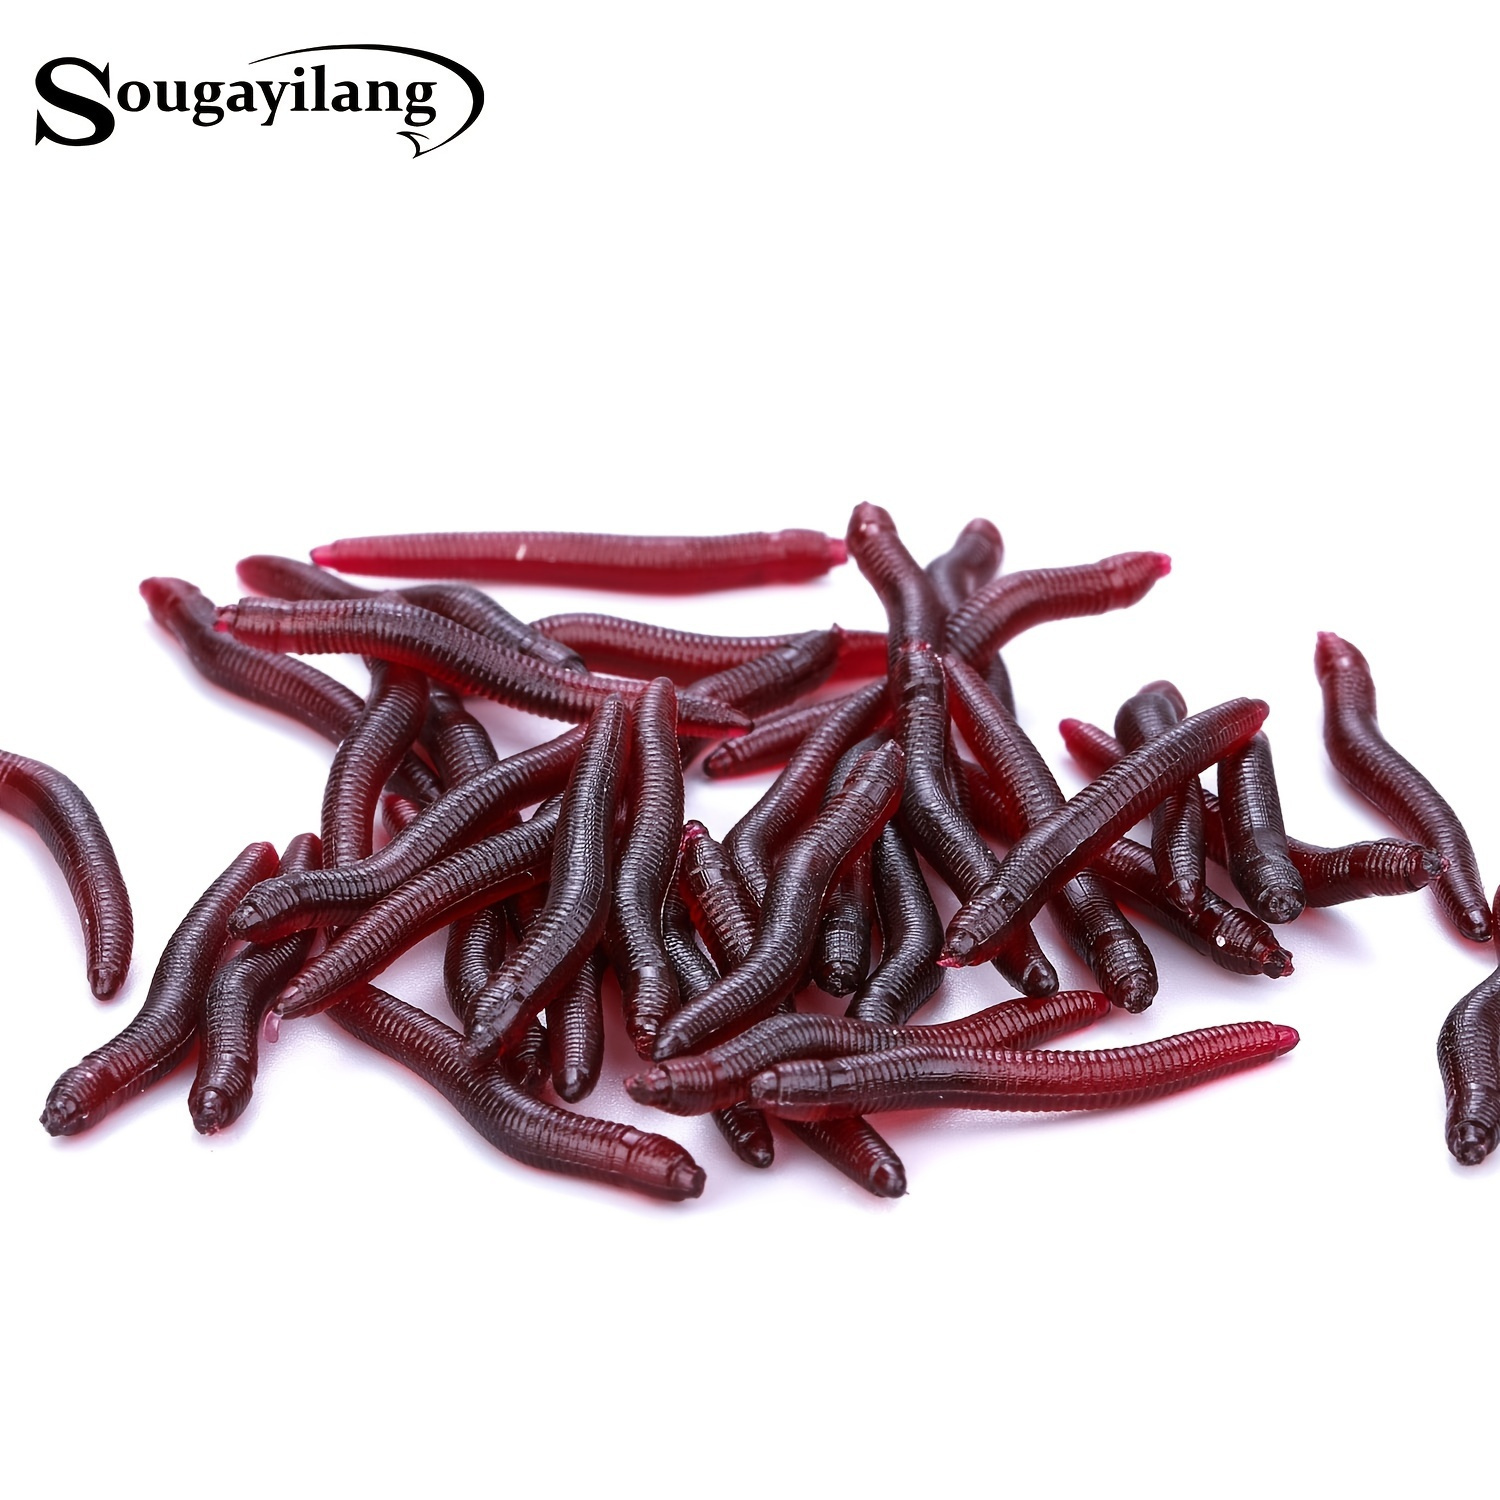 500PCS Lot Crawlers Rubber Earthworm Fishing Bait Red Worms Lure